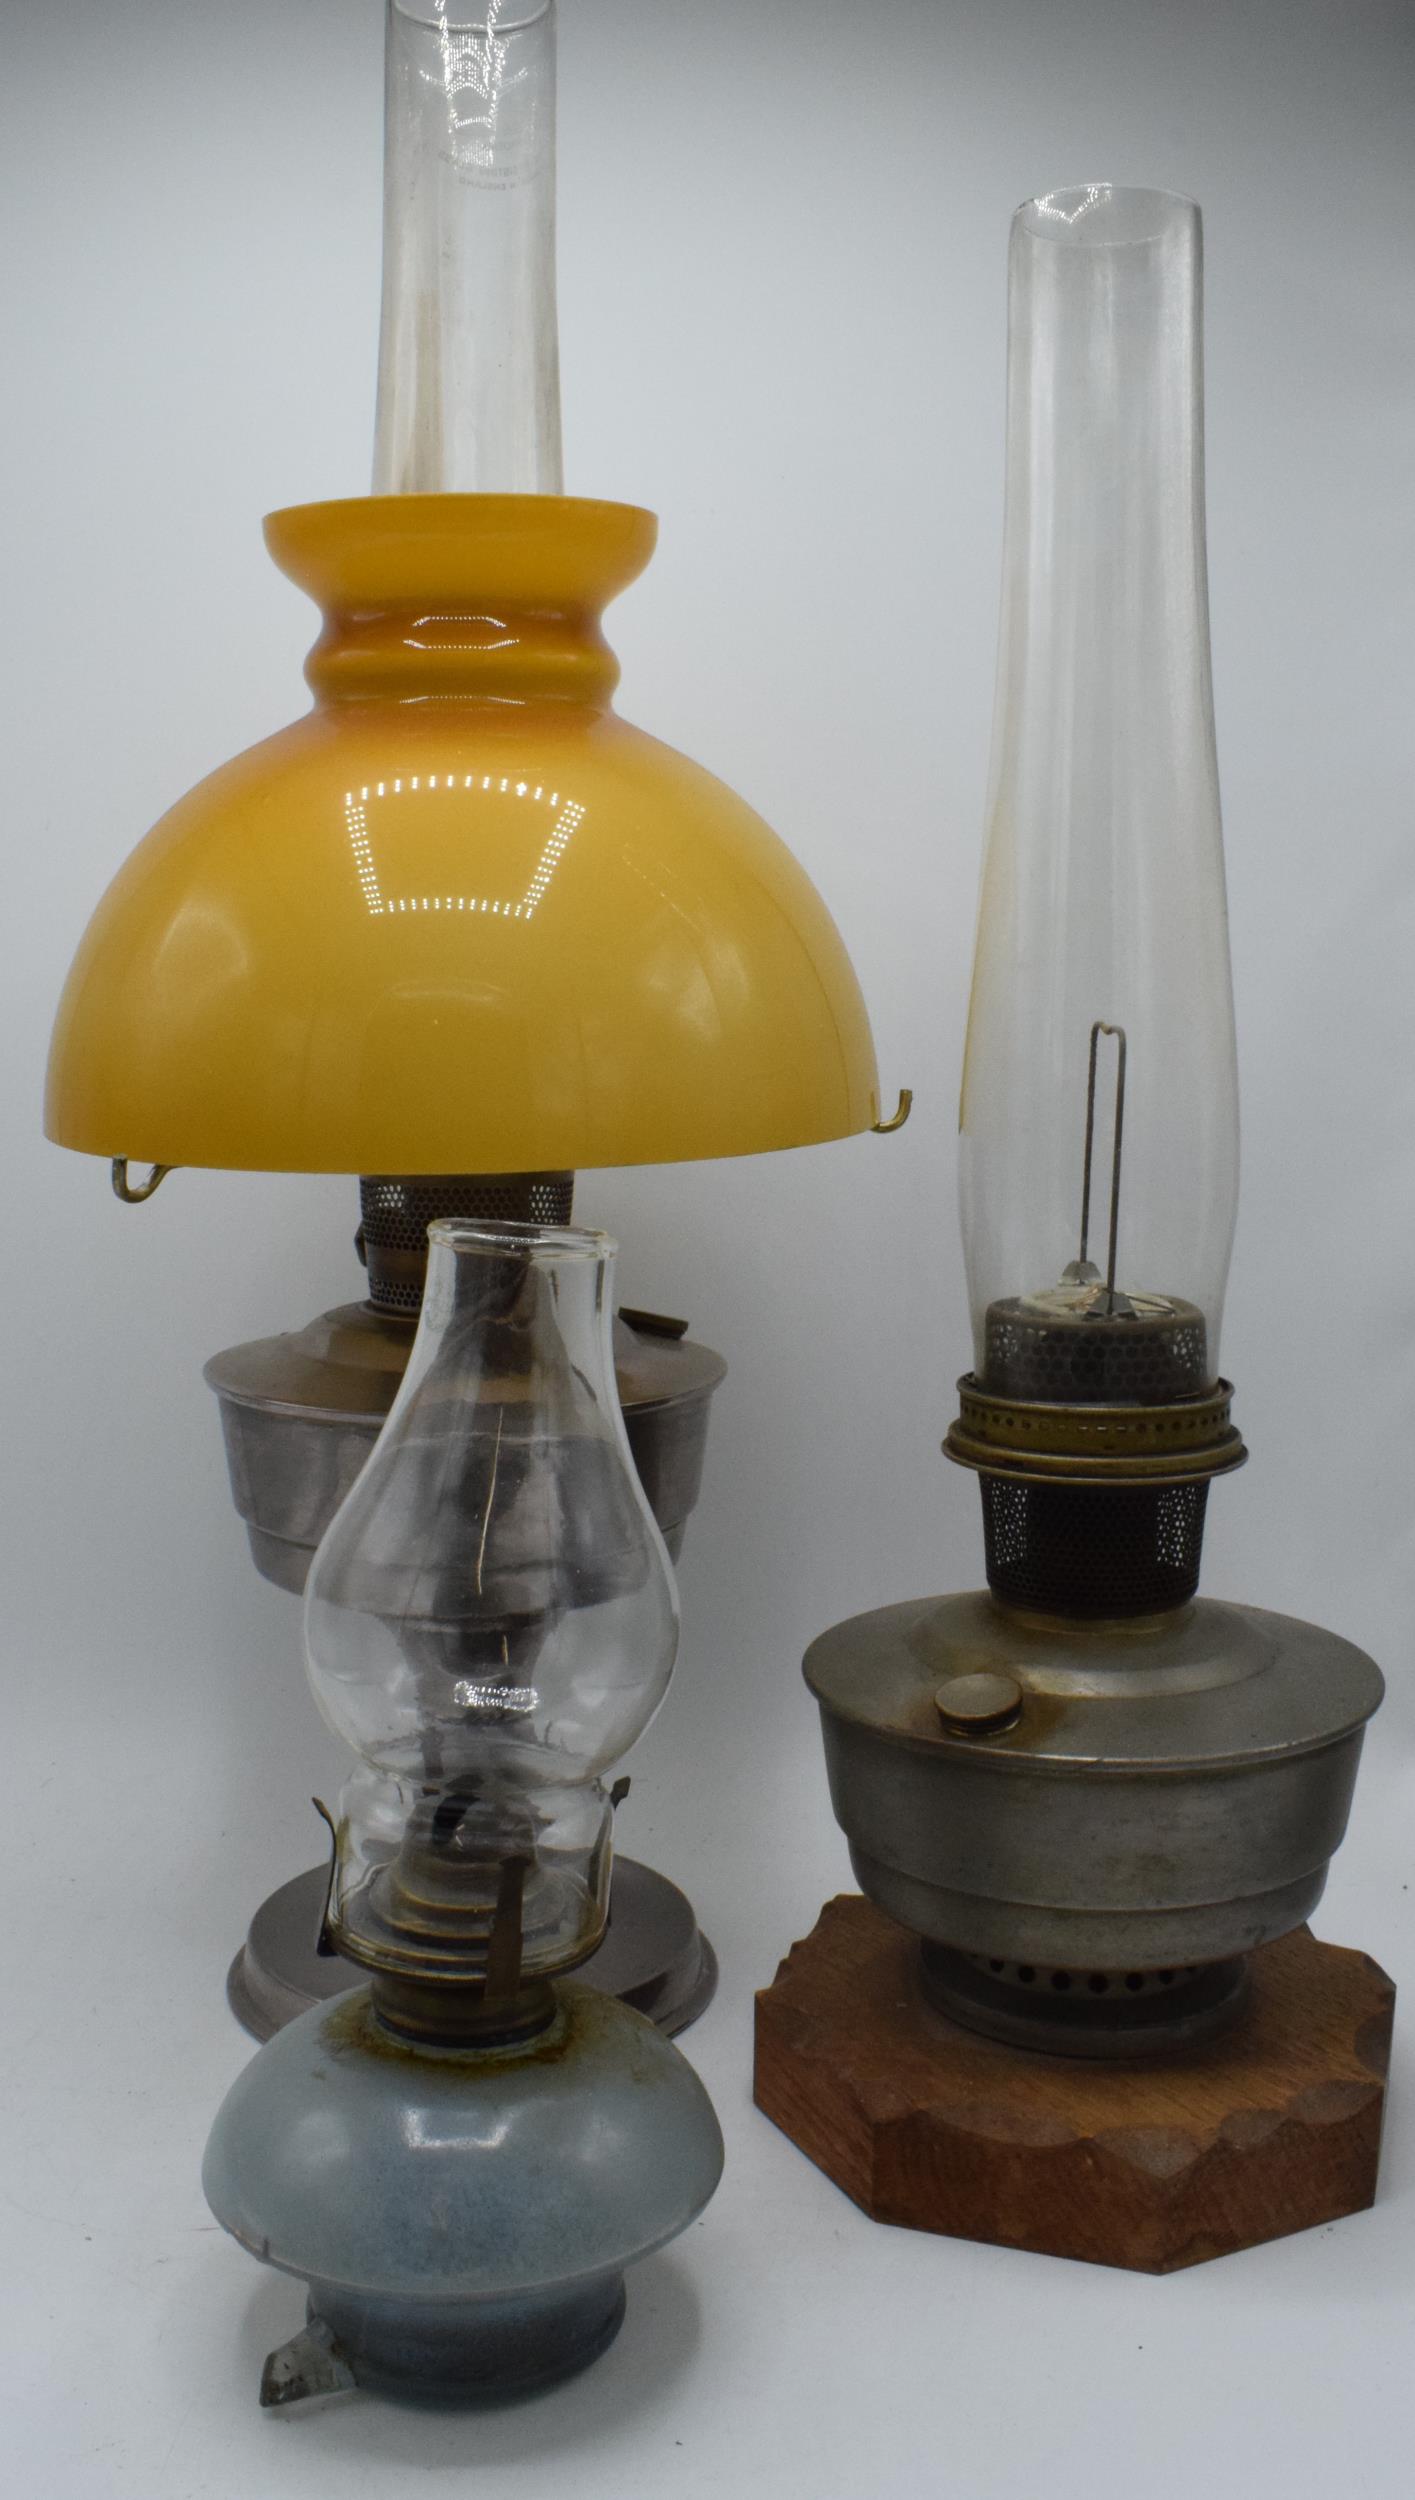 A collection of early 20th century oil lamps to include examples by Aladdin and Queen Anne. Three in